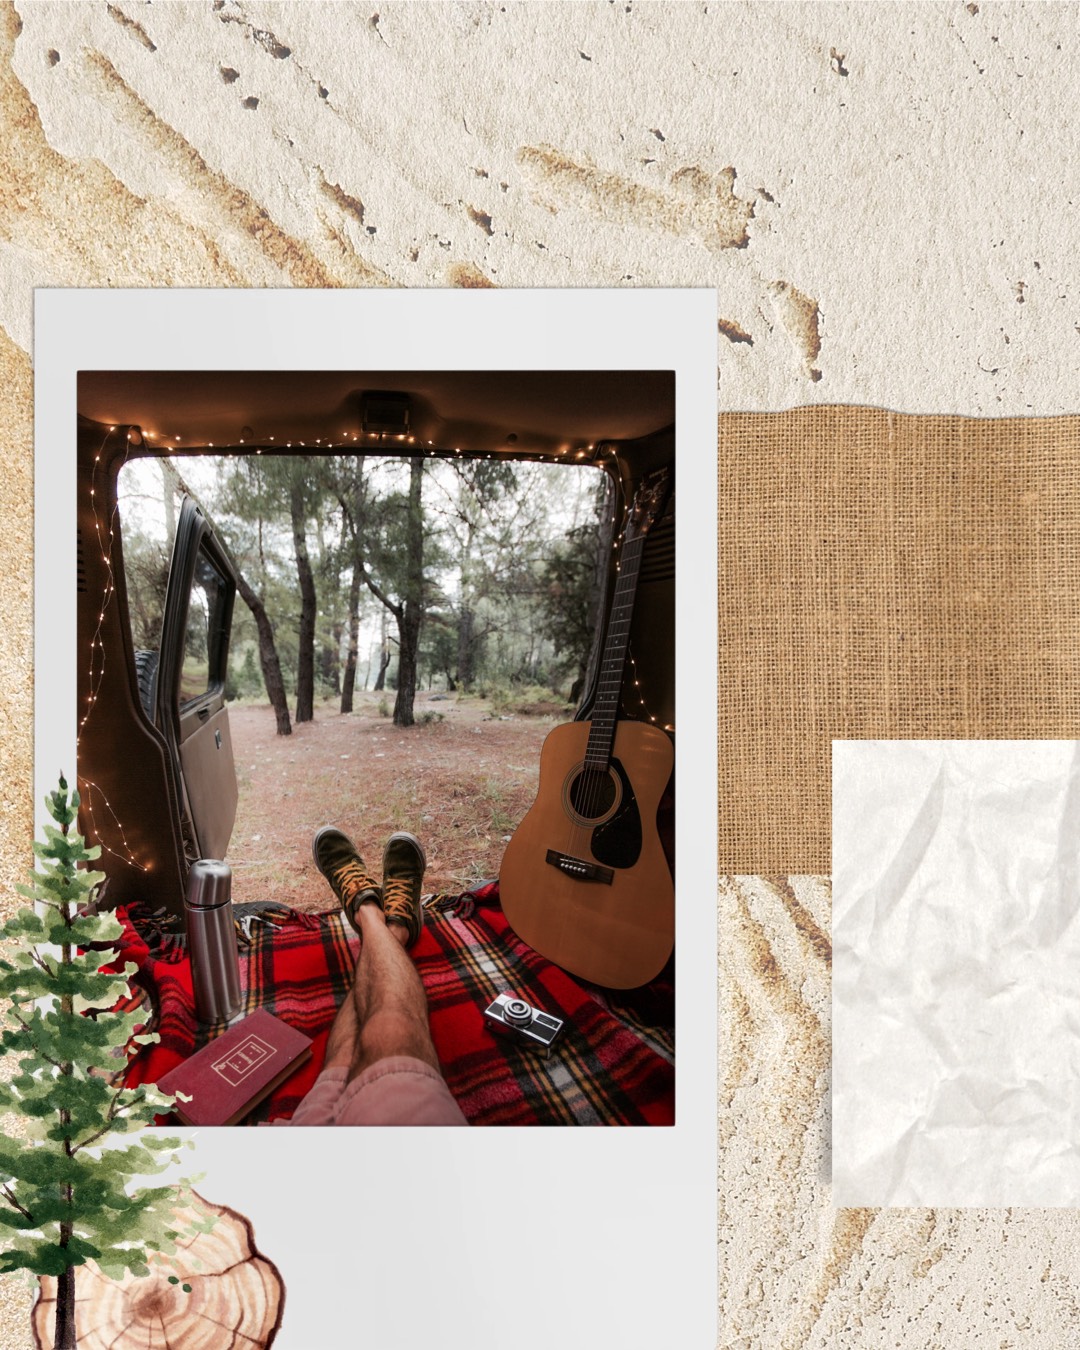 A Picture Of A Person Sitting In A Tent With A Guitar Wanderlust Template